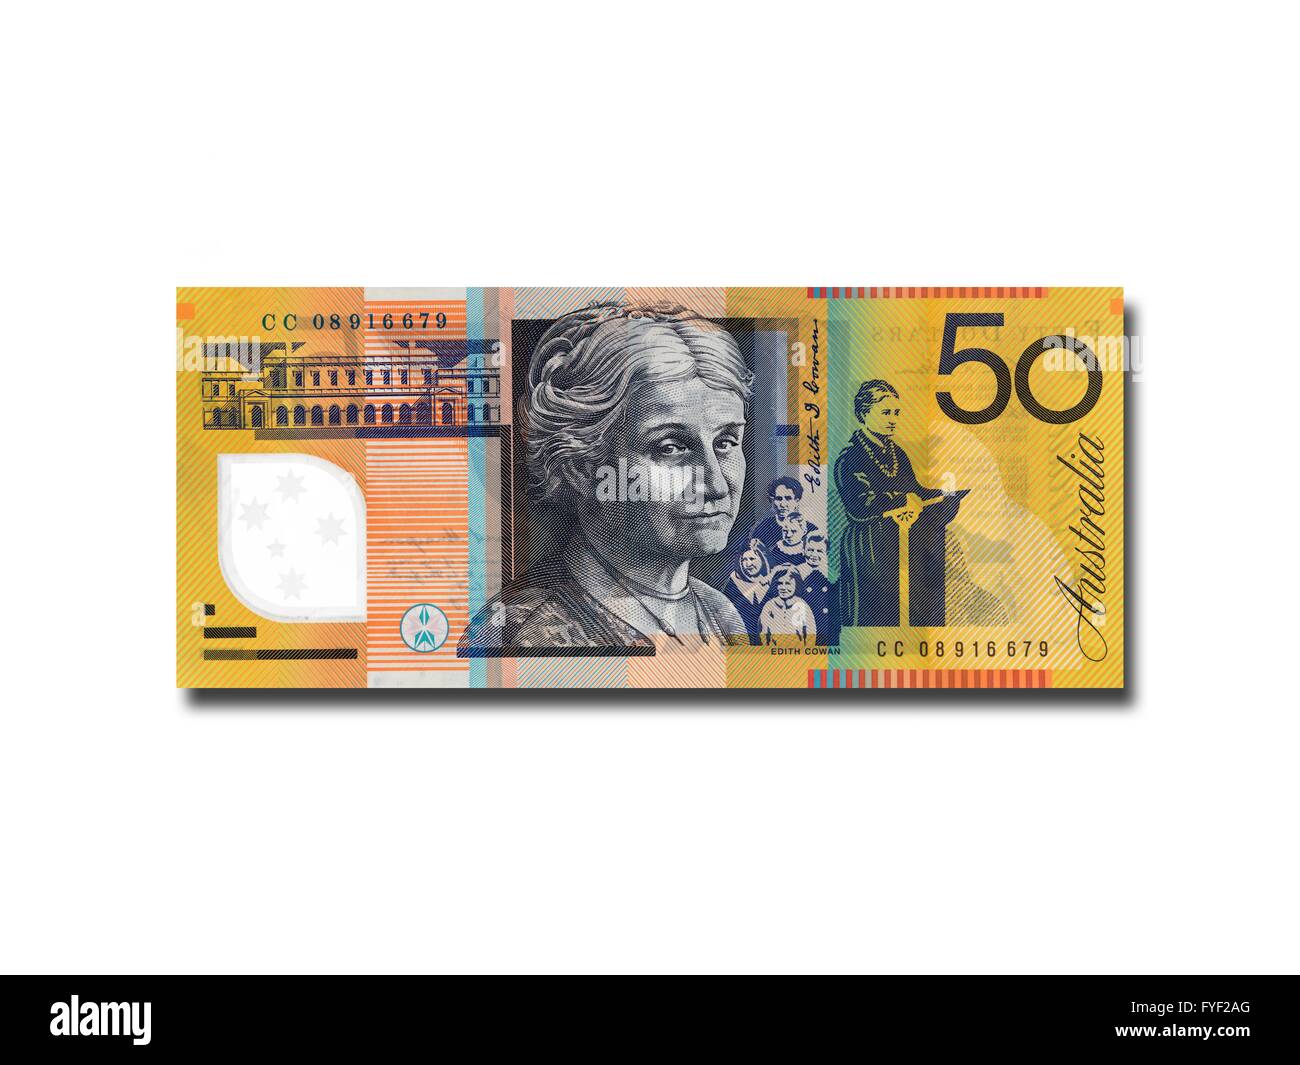 Australian fifty dollar note isolated against a white background Stock Photo